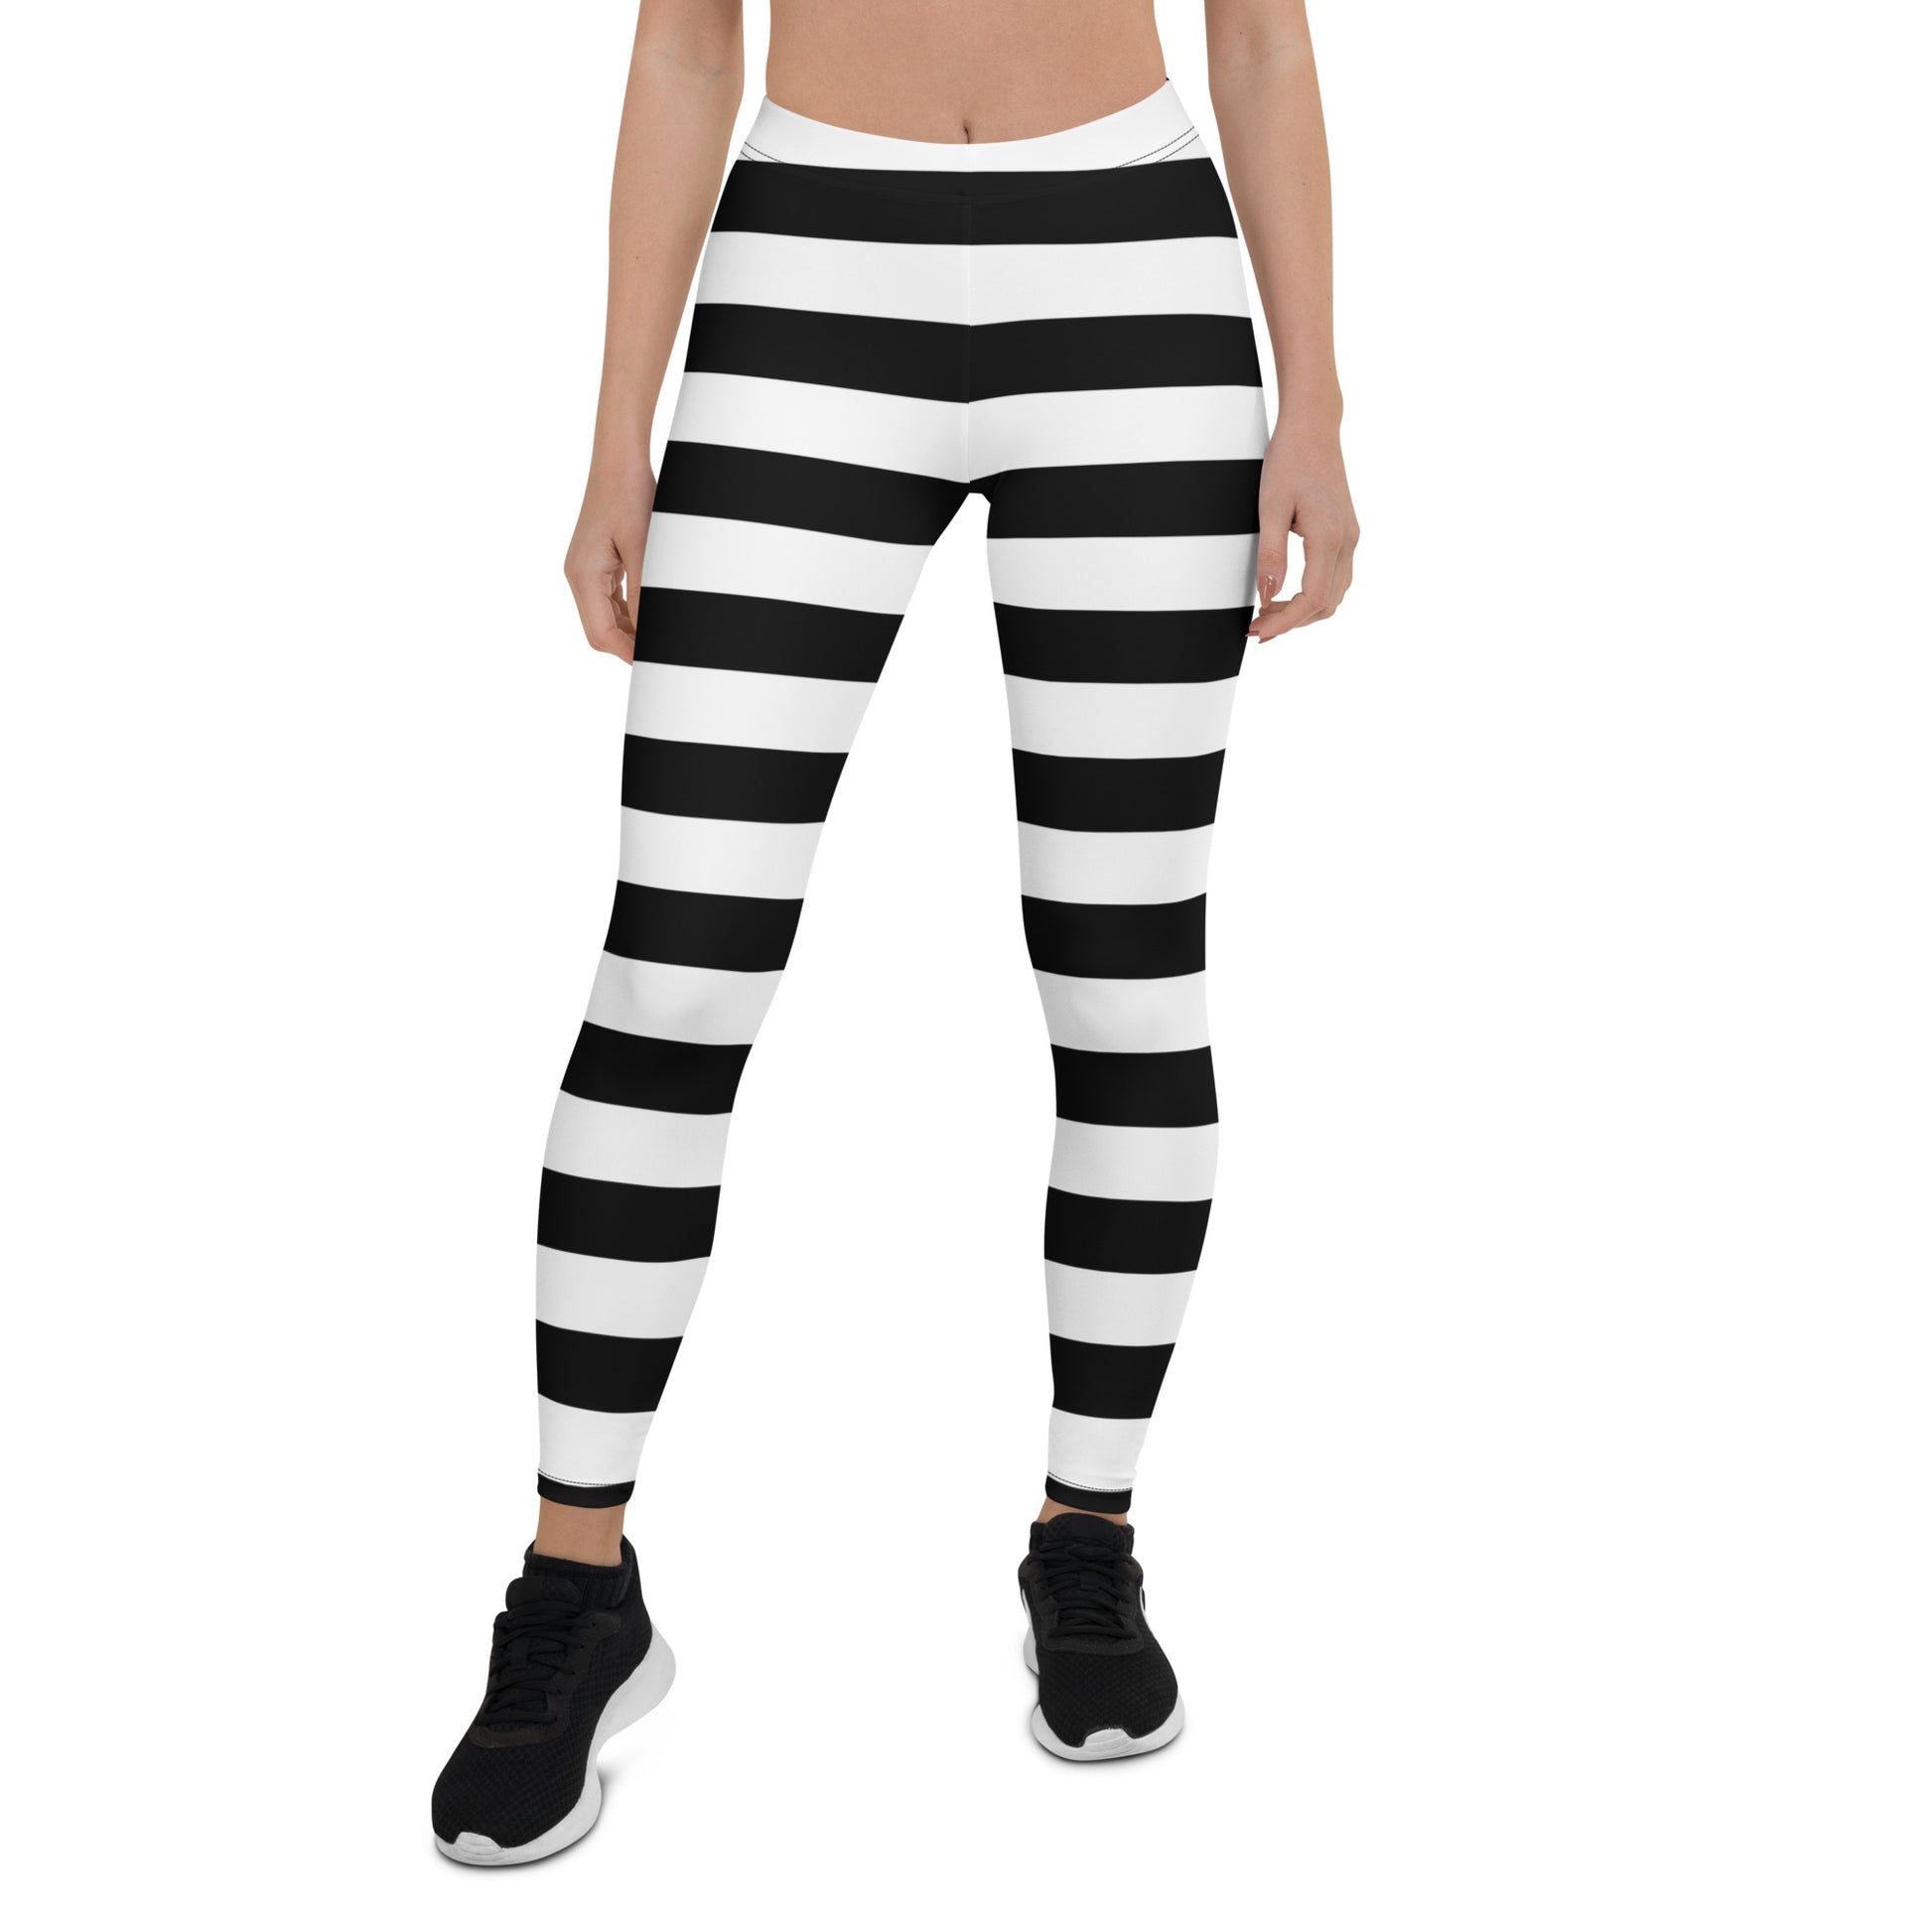 Black White Striped Leggings Women, Halloween Witch Goth Printed Yoga Pants  Cute Graphic Workout Designer Tights Gift